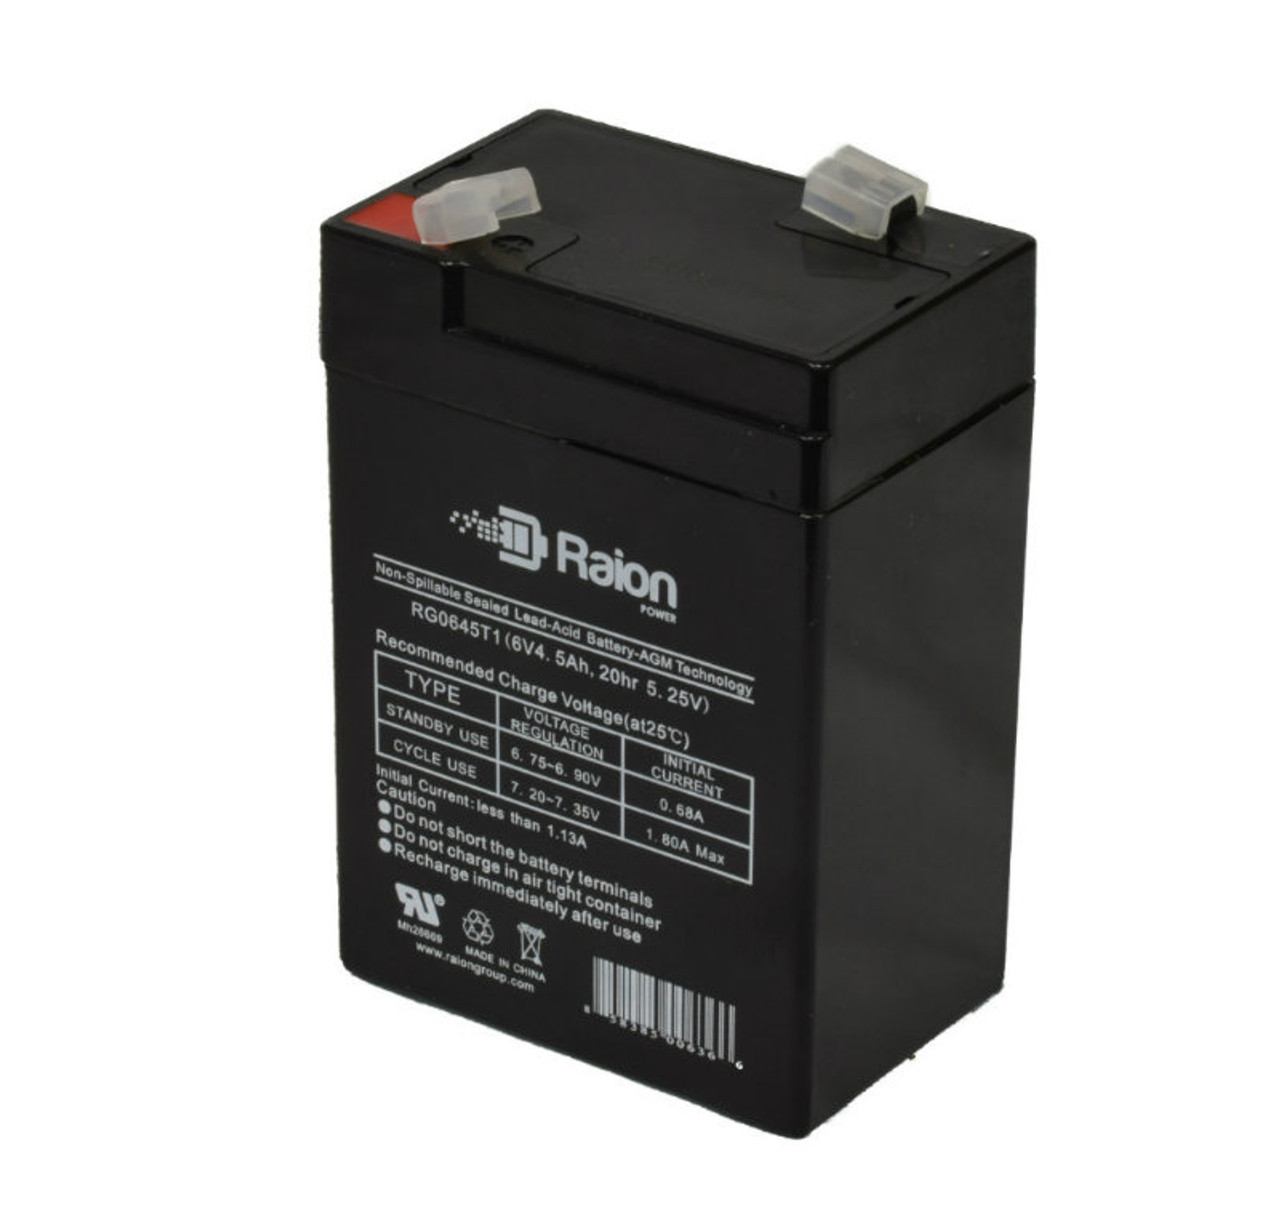 Raion Power RG0645T1 6V 4.5Ah Replacement Battery Cartridge for Dynaray DR520